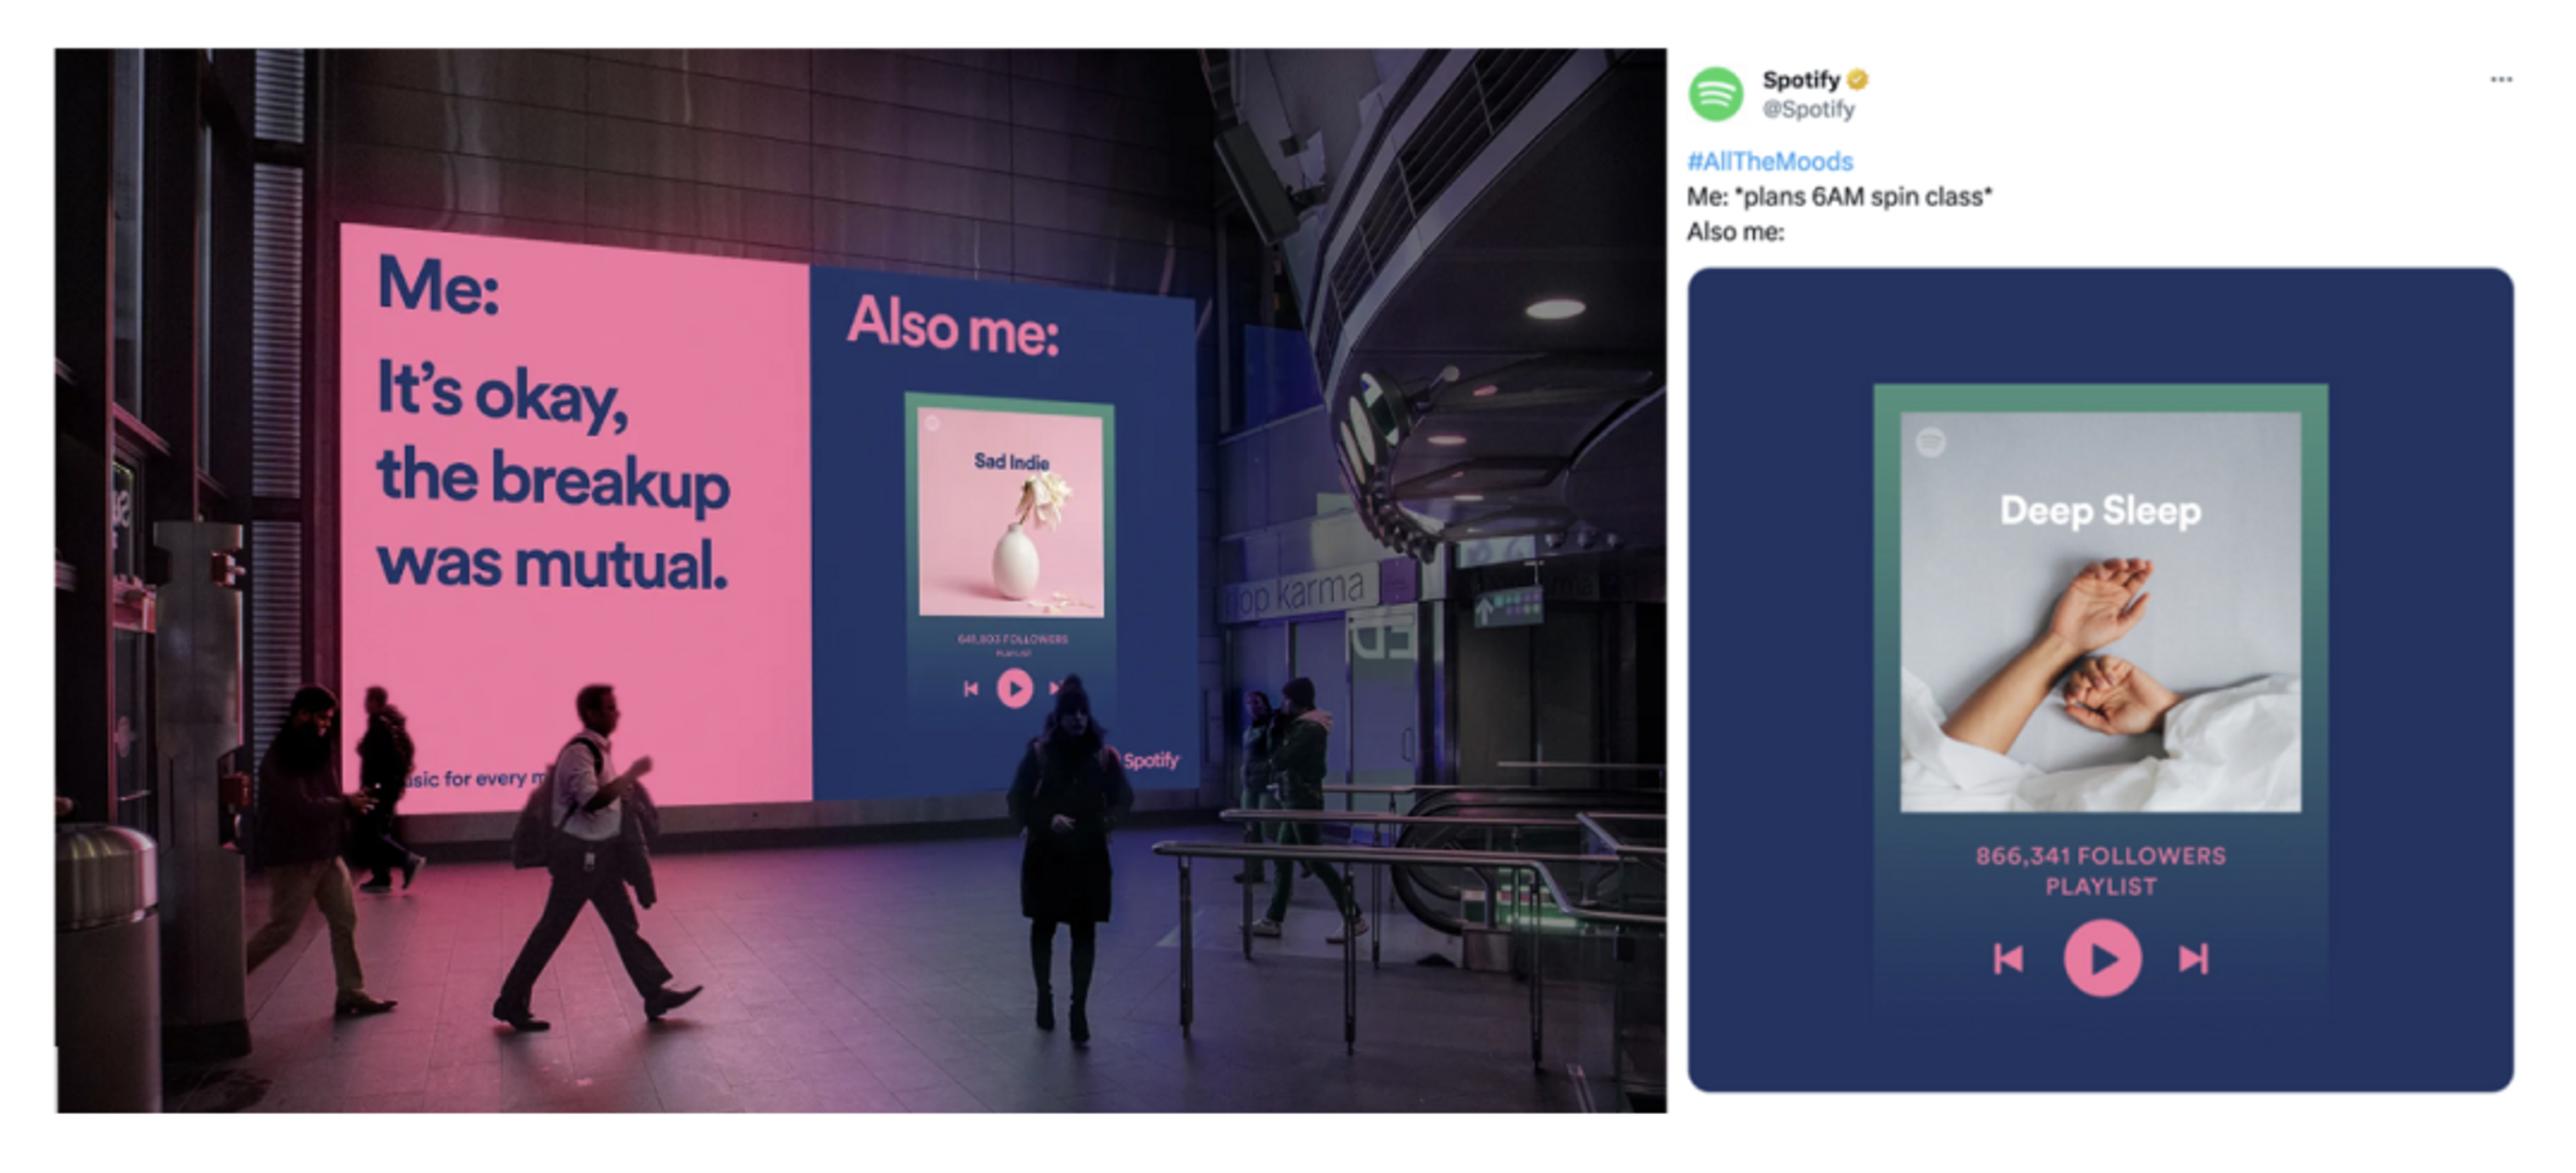 Digital advertising screens in an urban transit area displaying Spotify's 'All The Moods' campaign, with contrasting messages about breakups and moods reflected in music playlists, with people walking by.